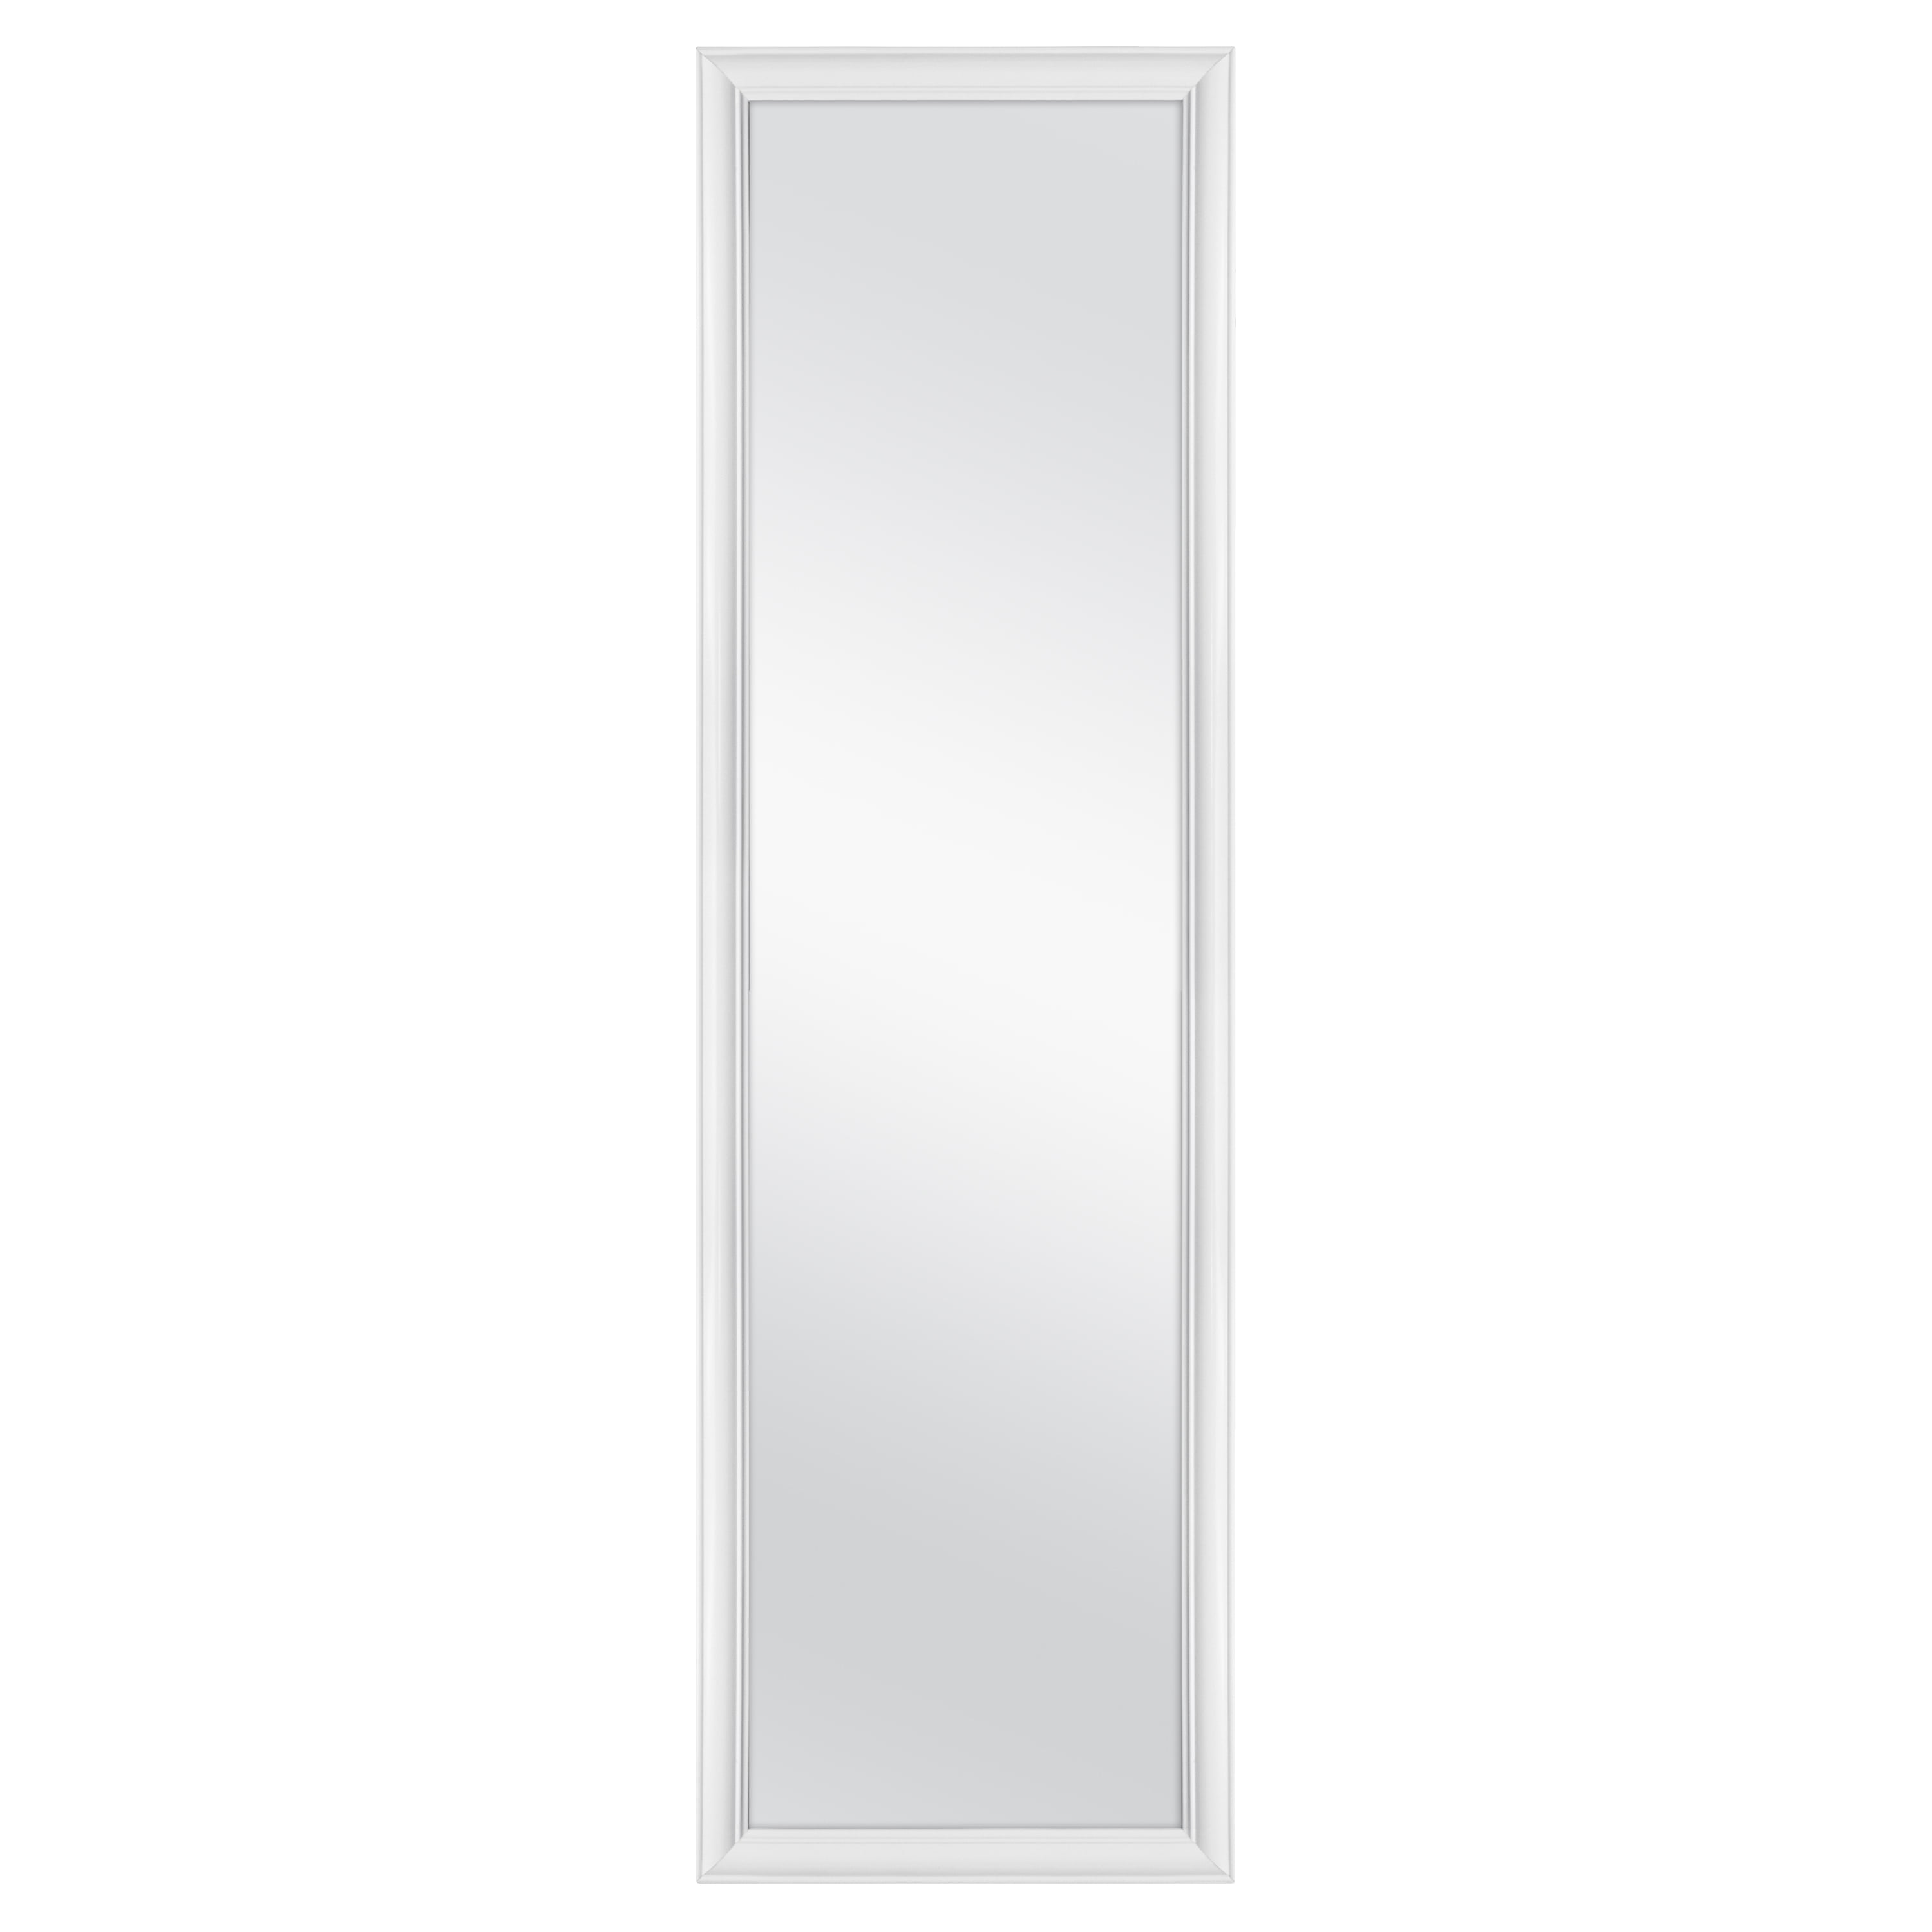 Mainstays Over-The-Door Mirror with Hardware, 14.25X50.25 IN, White